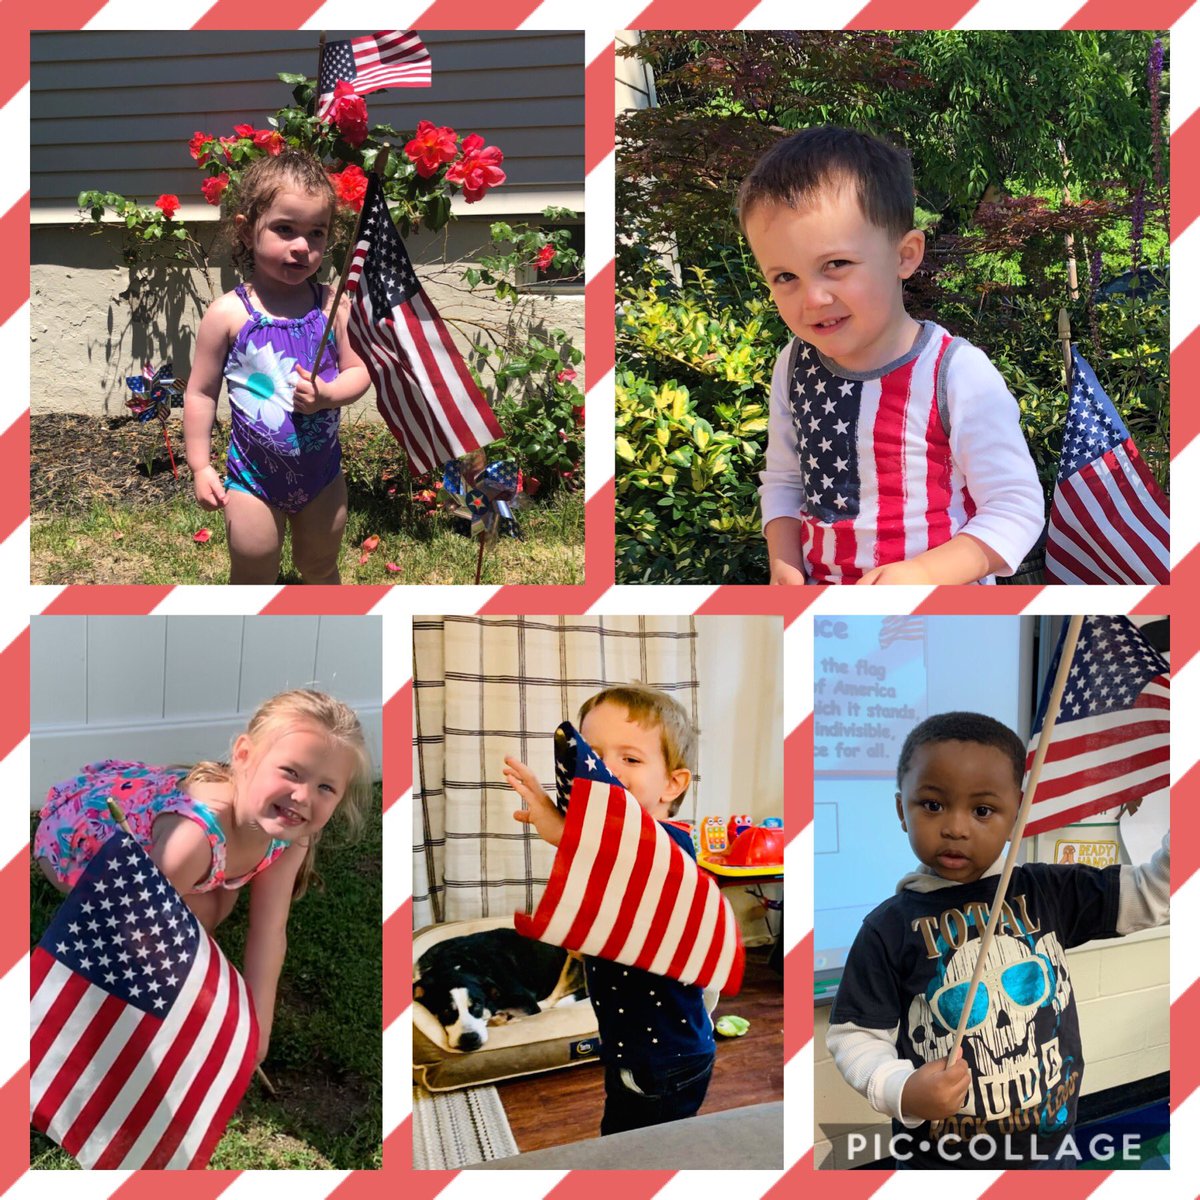 You're a grand old flag, You're a high-flying flag, And forever in peace may you wave. Happy Flag Day! 🇺🇸@SycamoreECLC #hazletproud